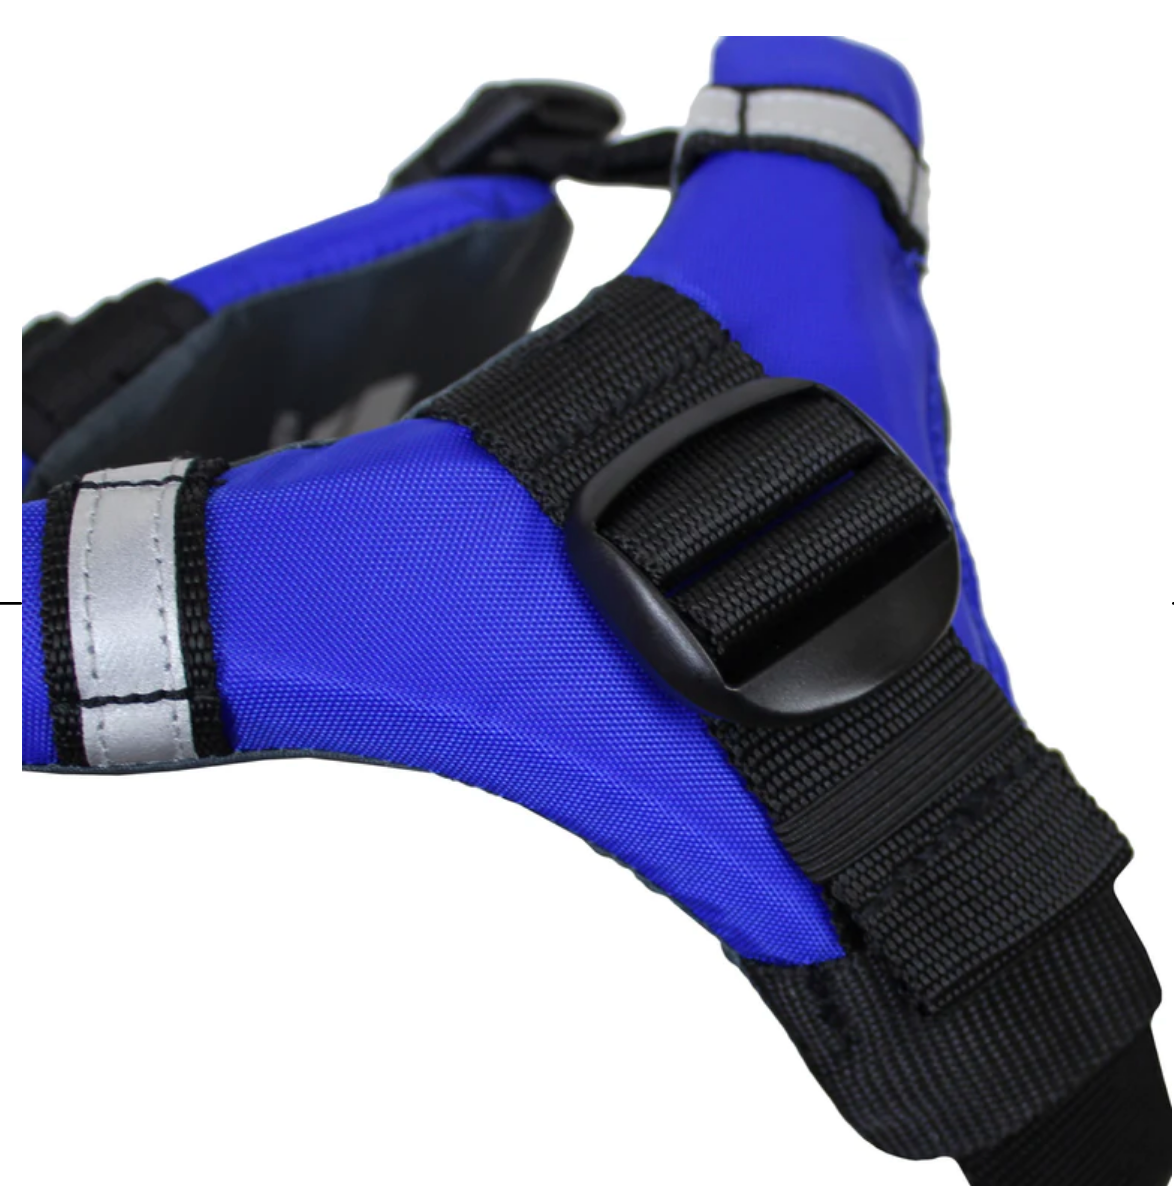 Pup Float - Life Jacket for Dogs